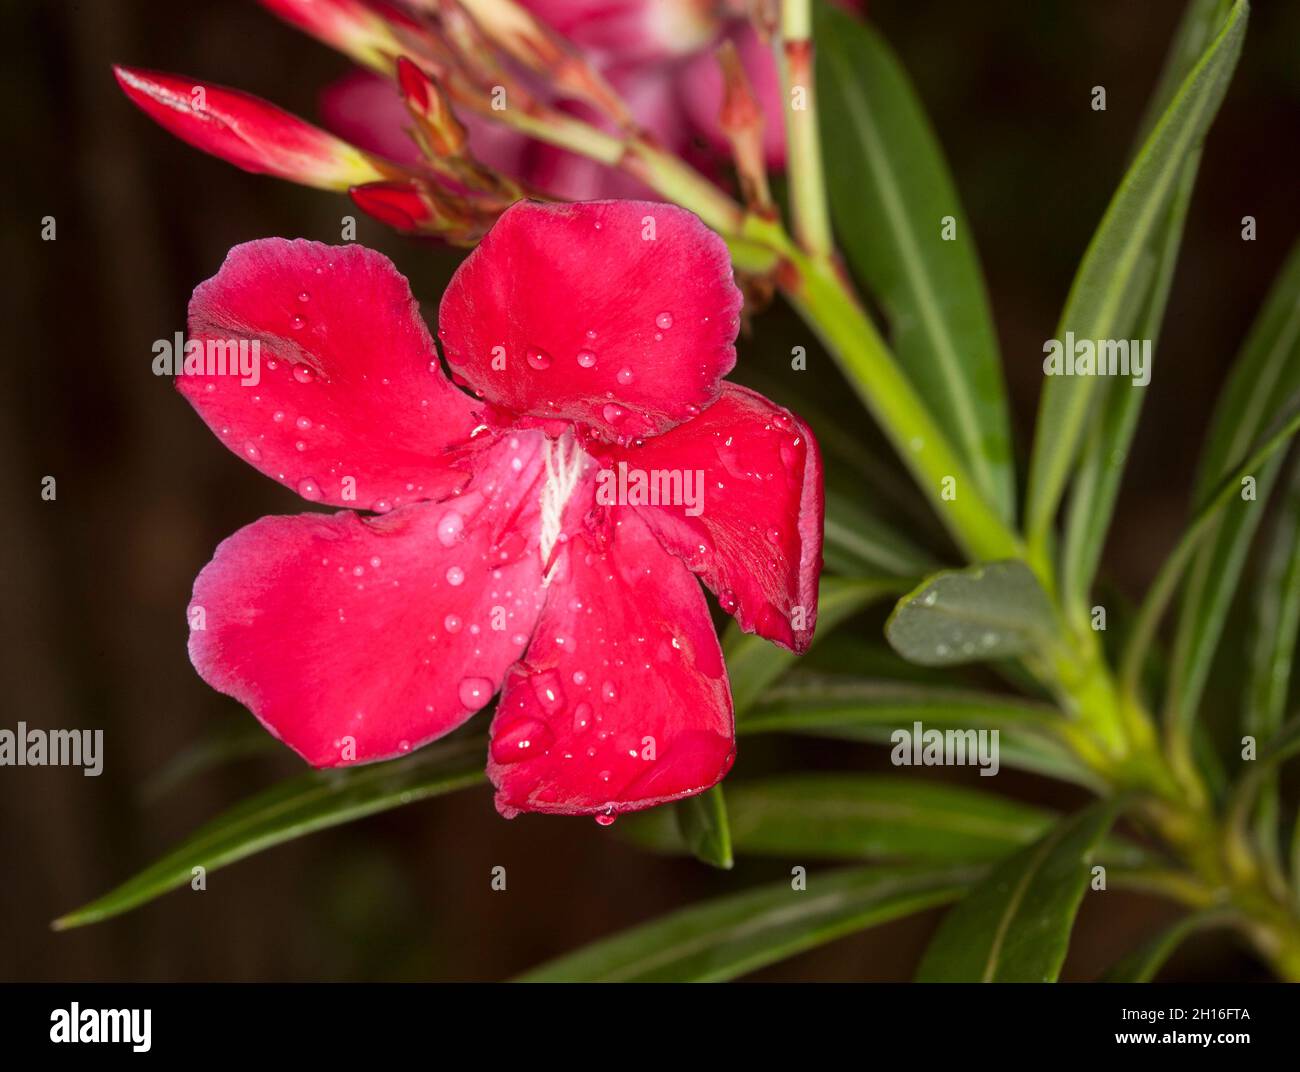 Vivid red flower, buds and green leaves of Nerium oleander 'Monrovia Red', an evergreen shrub with poisonous sap, on a dark background, in Australia Stock Photo